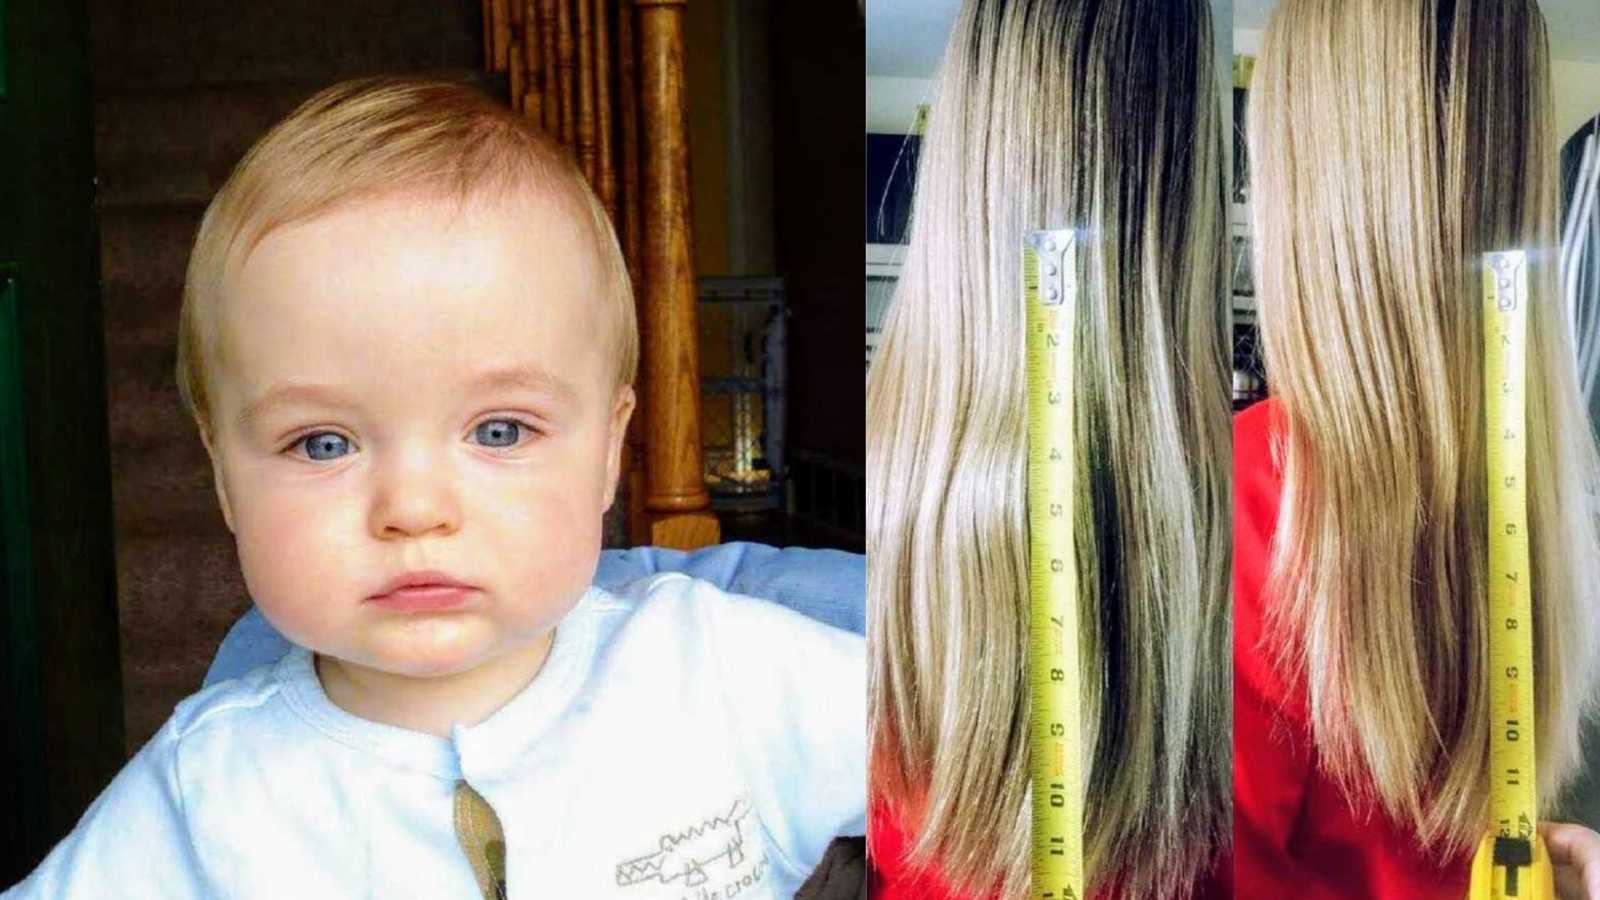 What are you doing in the boy's bathroom? You look like a girl!' The longer  it got, the more judgemental others got.': Boy grows hair to donate to kids  in need, 'Heart,